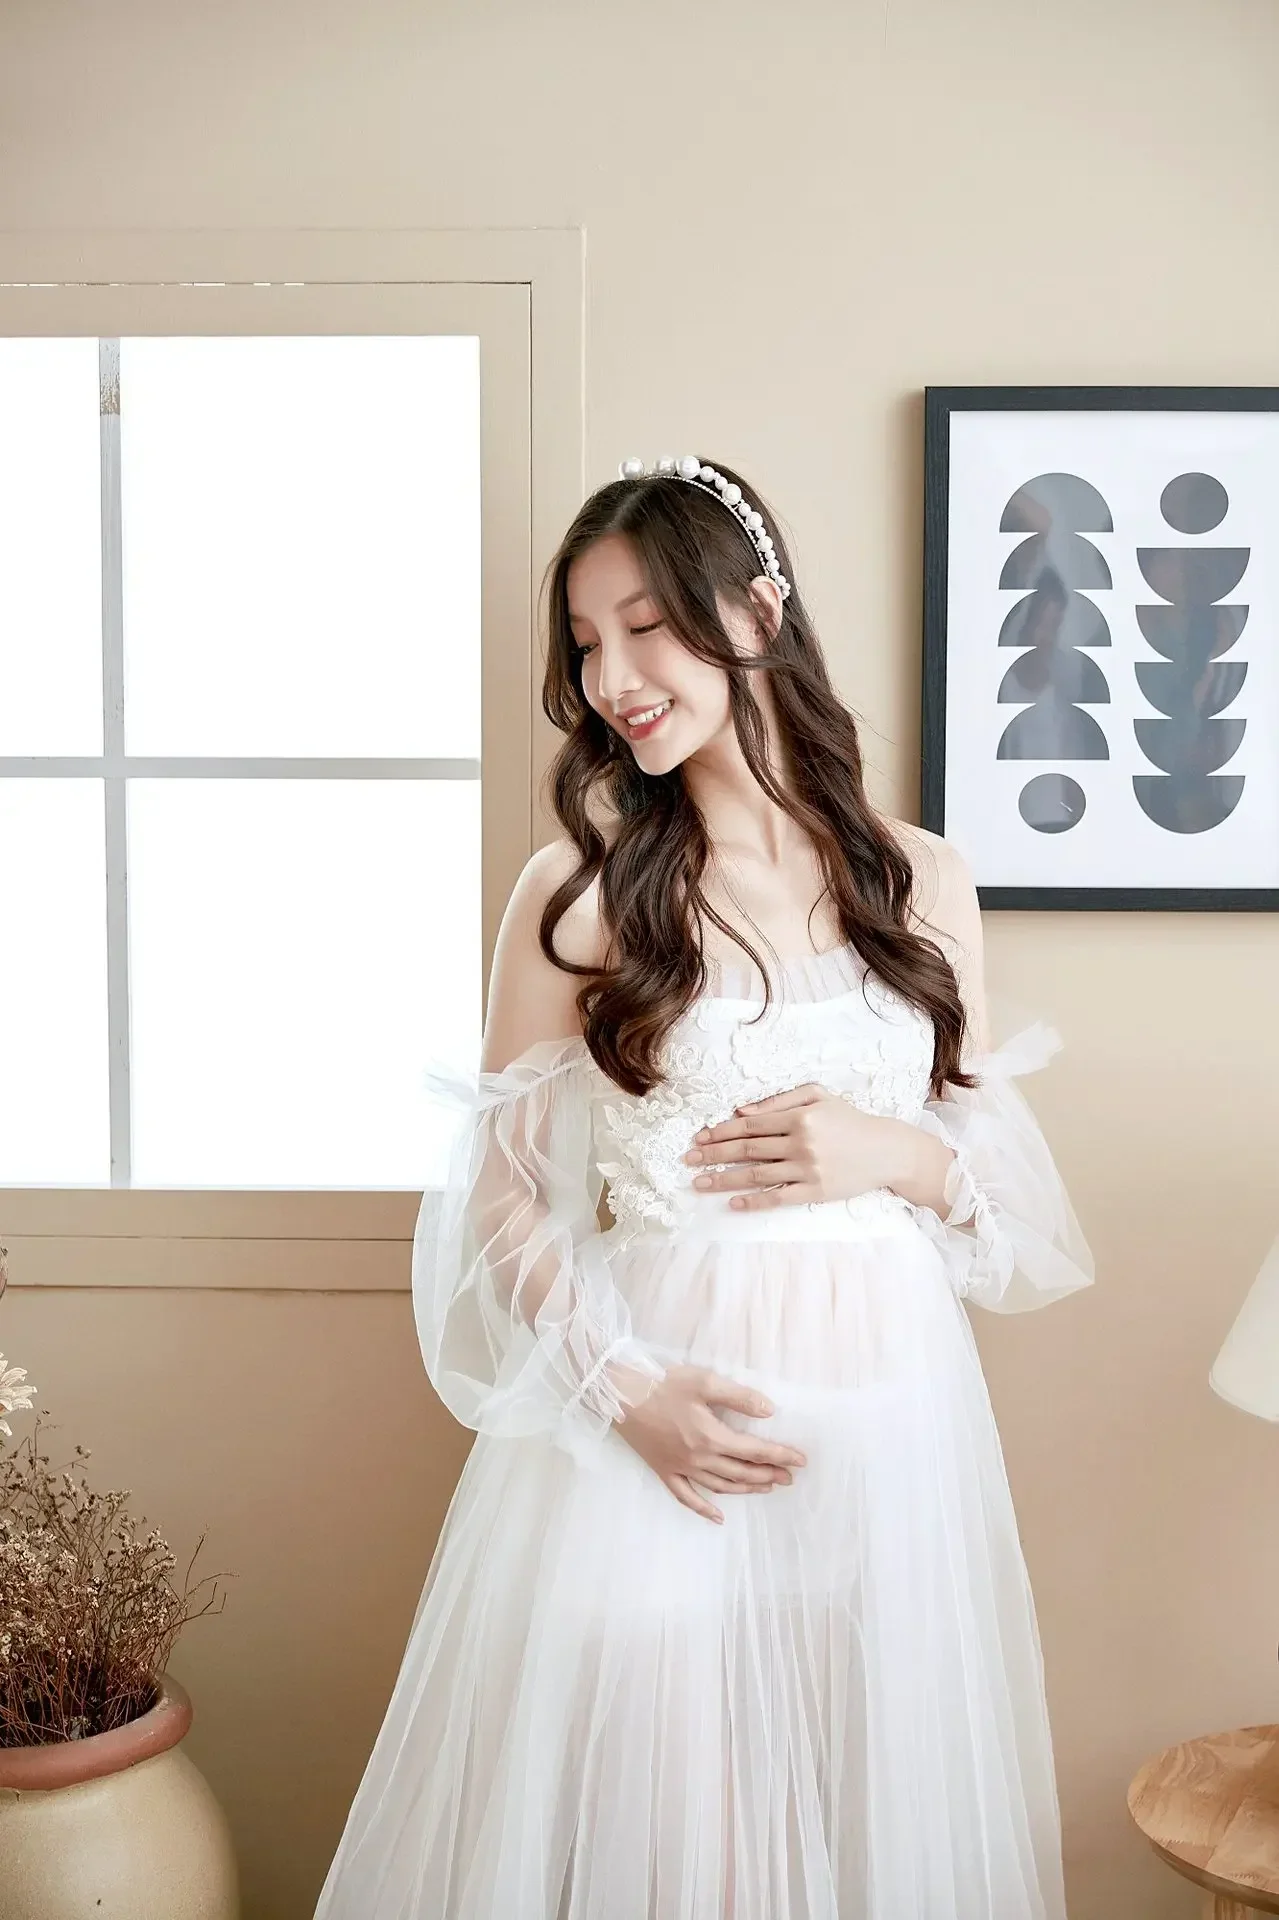 

New Sweet Maternity Photography Dresses Tulle Perspective Pregnancy Maxi Gown For Baby Shower Pregnant Women Photoshoot Prop